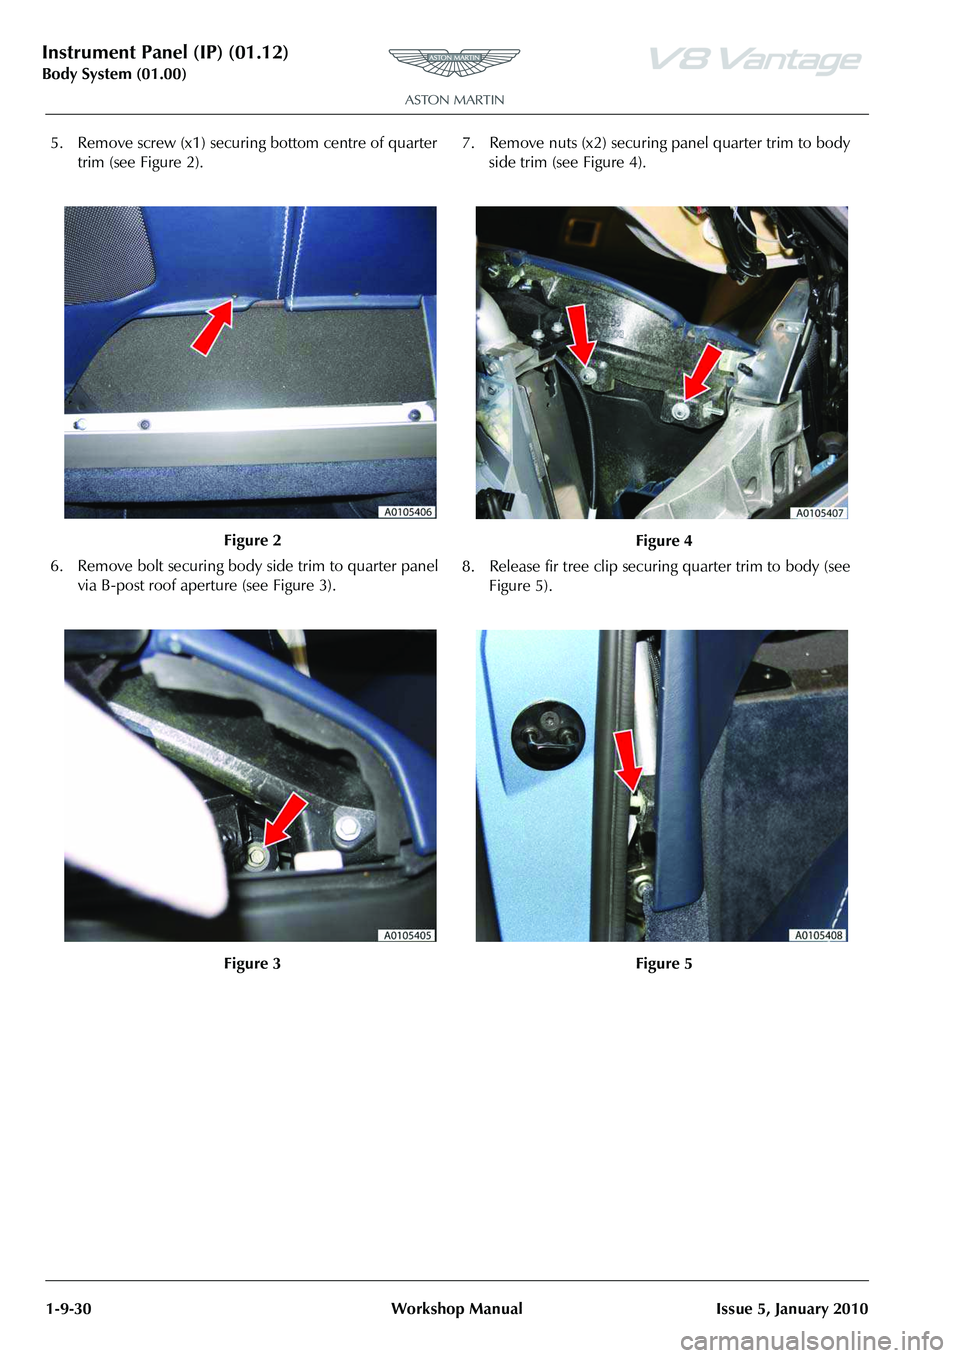 ASTON MARTIN V8 VANTAGE 2010 Owners Guide Instrument Panel (IP) (01.12)
Body System (01.00)1-9-30 Workshop Manual Issue 5, January 2010
5. Remove screw (x1) securing  bottom centre of quarter 
trim (see Figure 2).
6. Remove bolt securing body